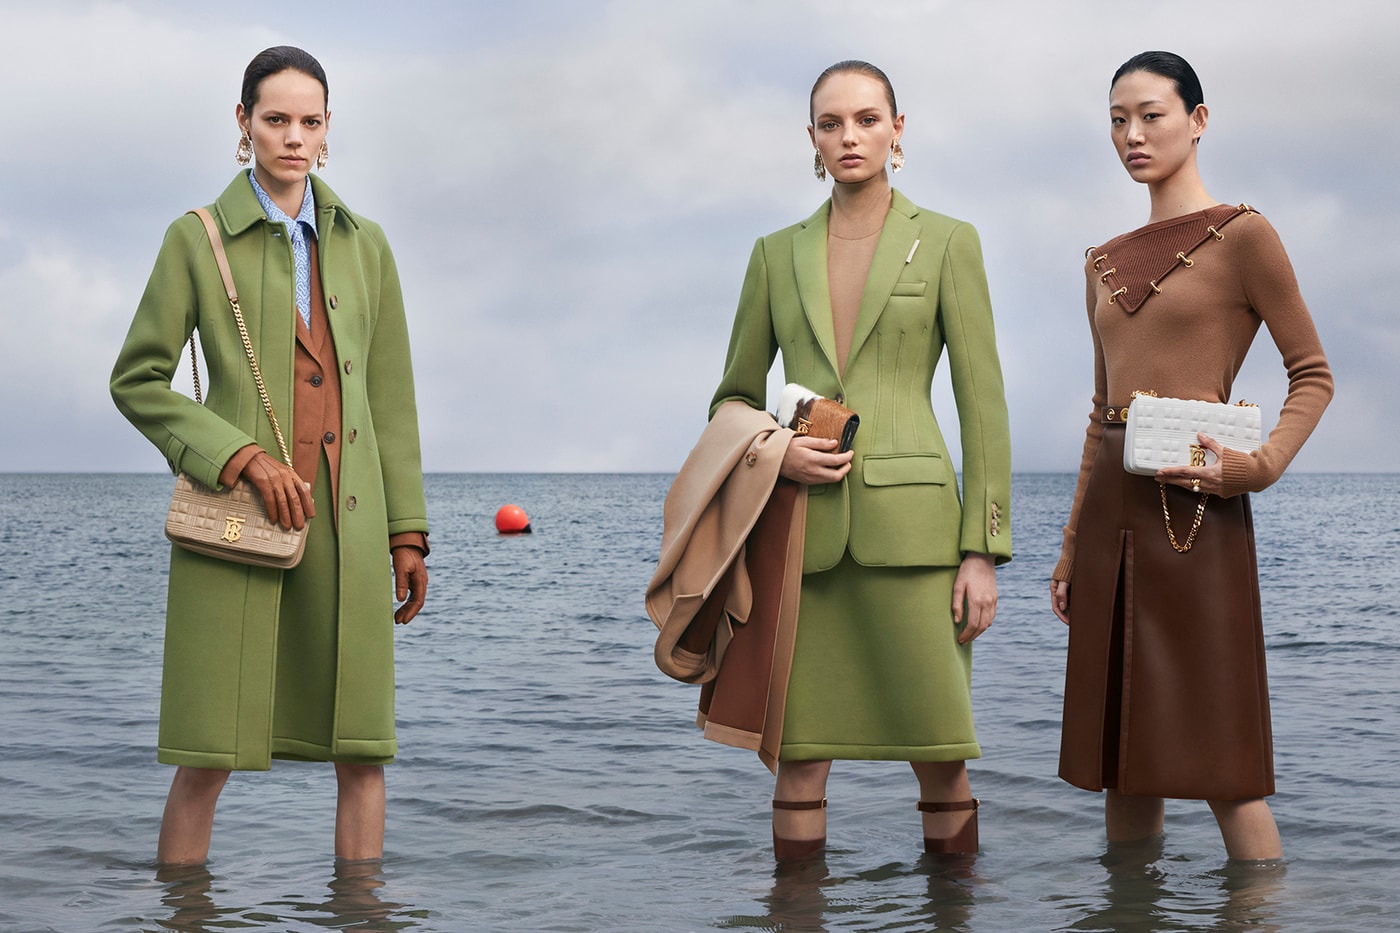 burberry fall winter campaign 2019 green jacket suit bags designer